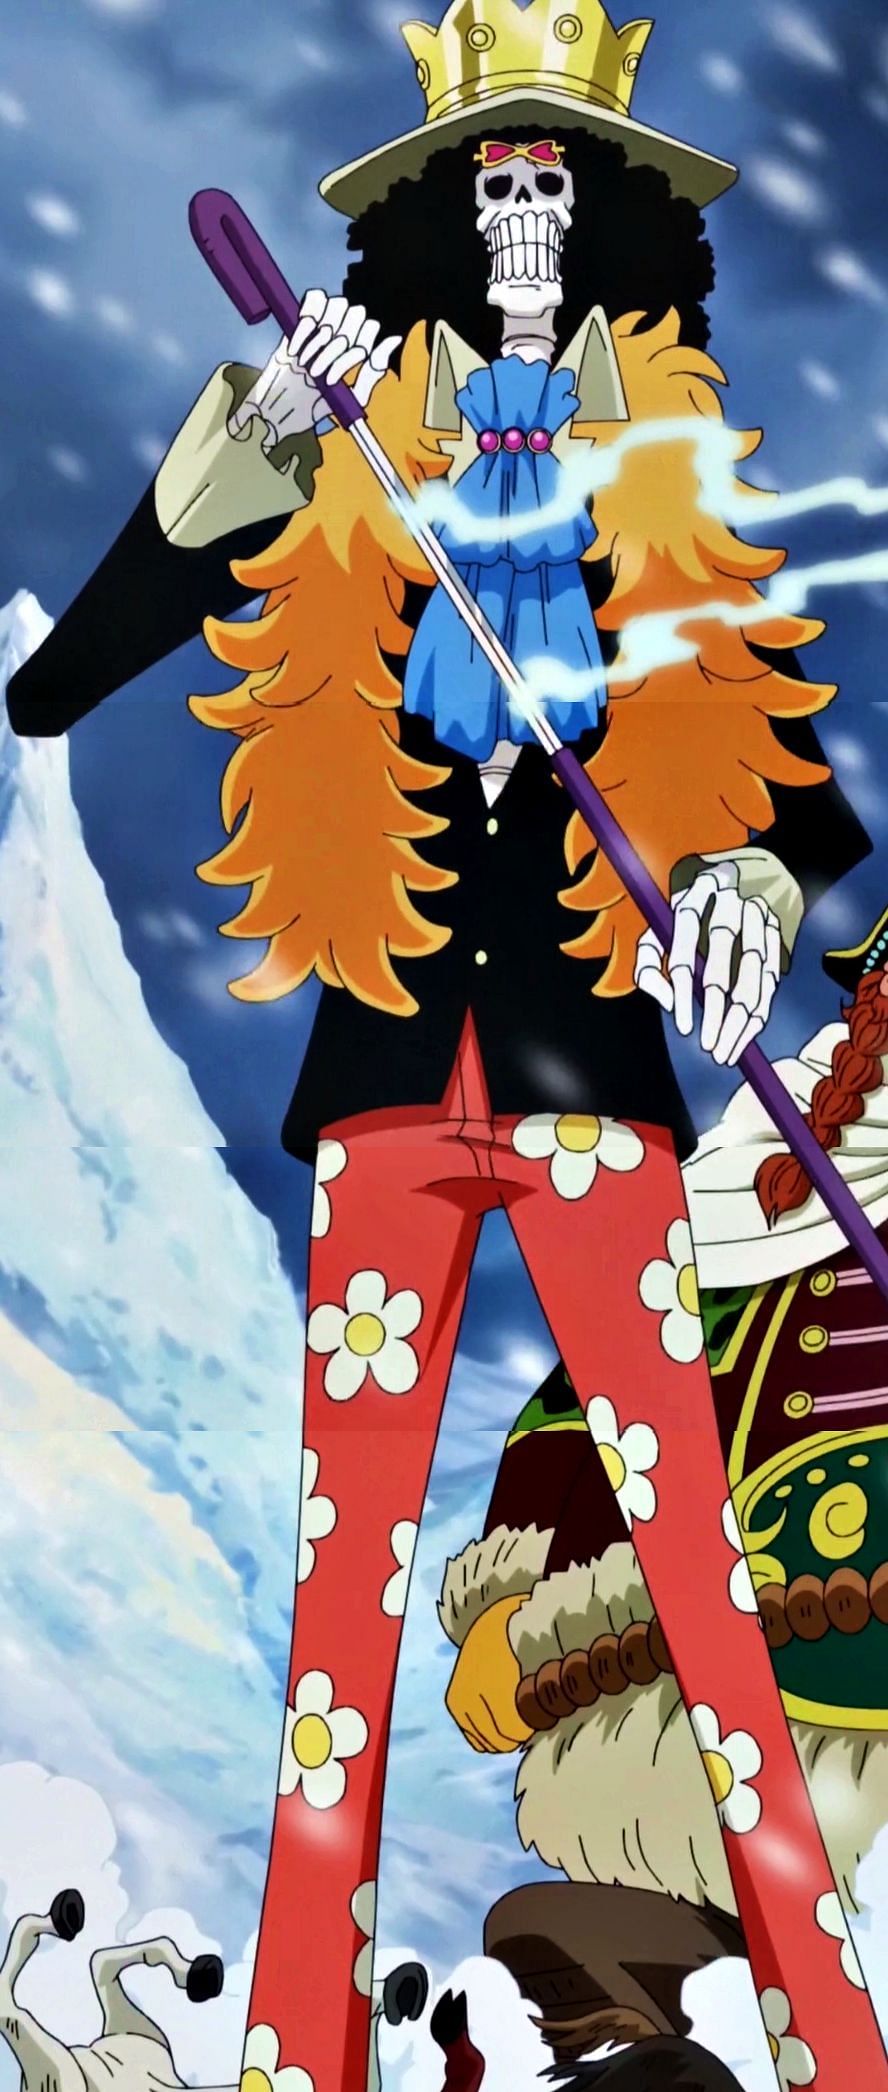 Brook's post time-skip design as seen in the One Piece anime. (Image via Toei Animation)